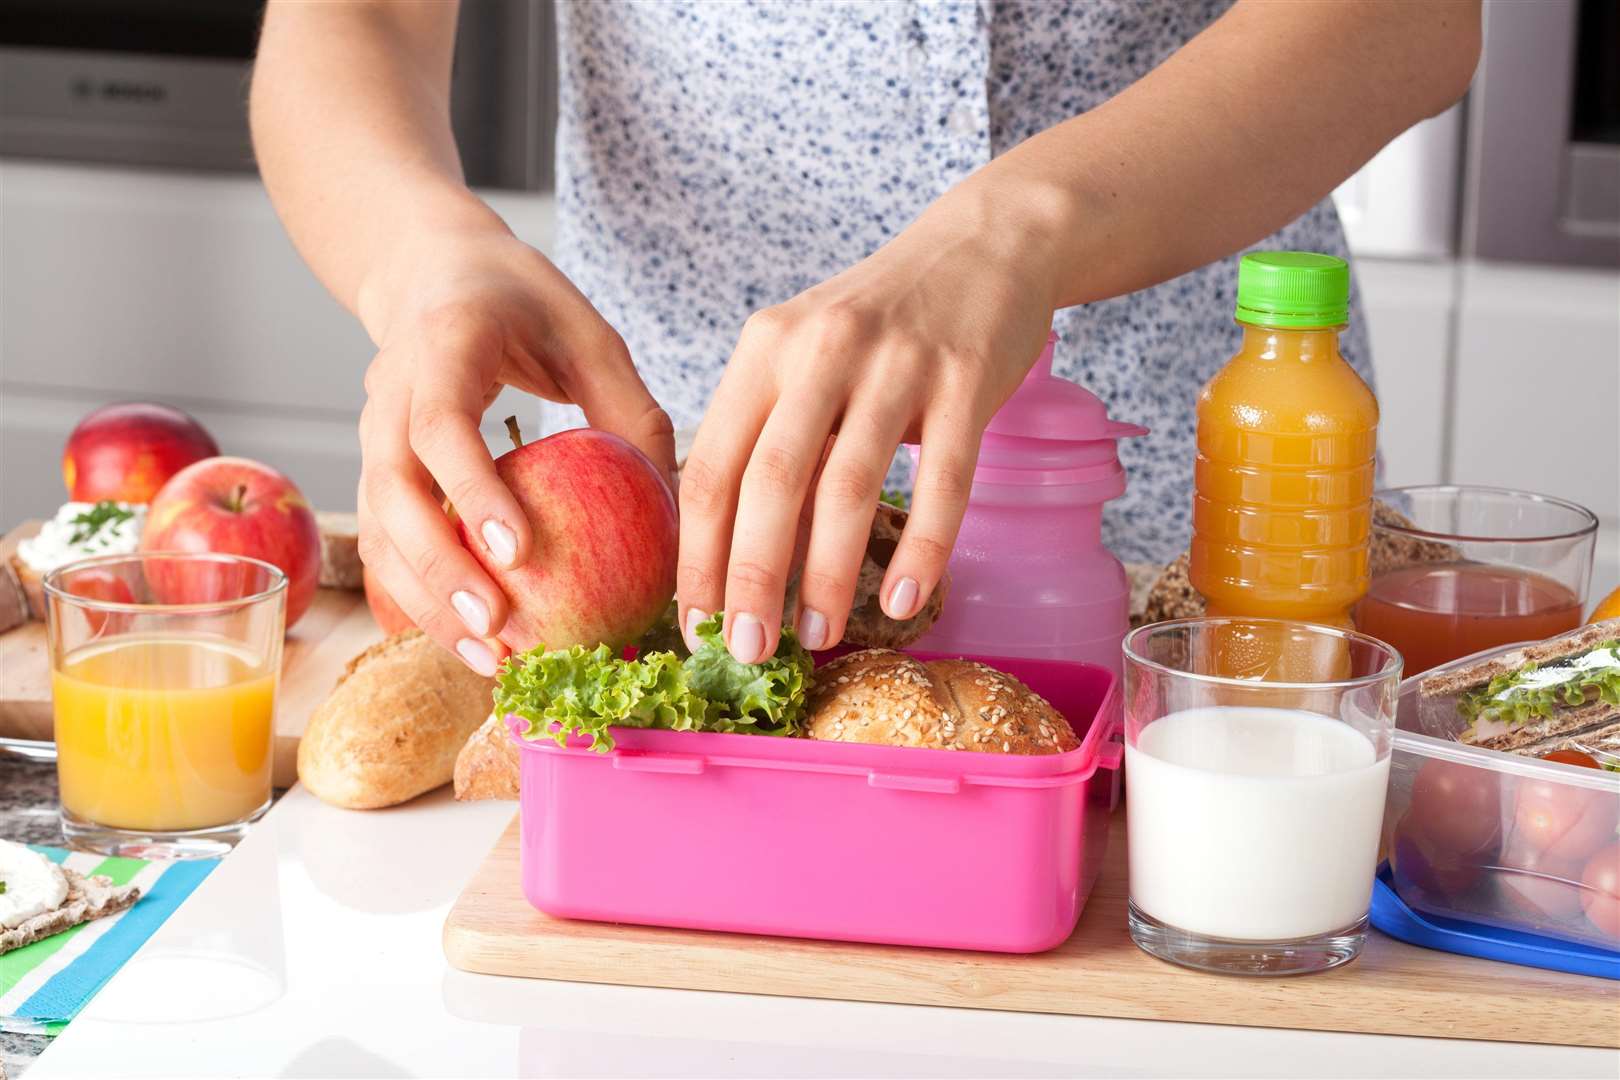 Pack their lunch with healthy ingredients